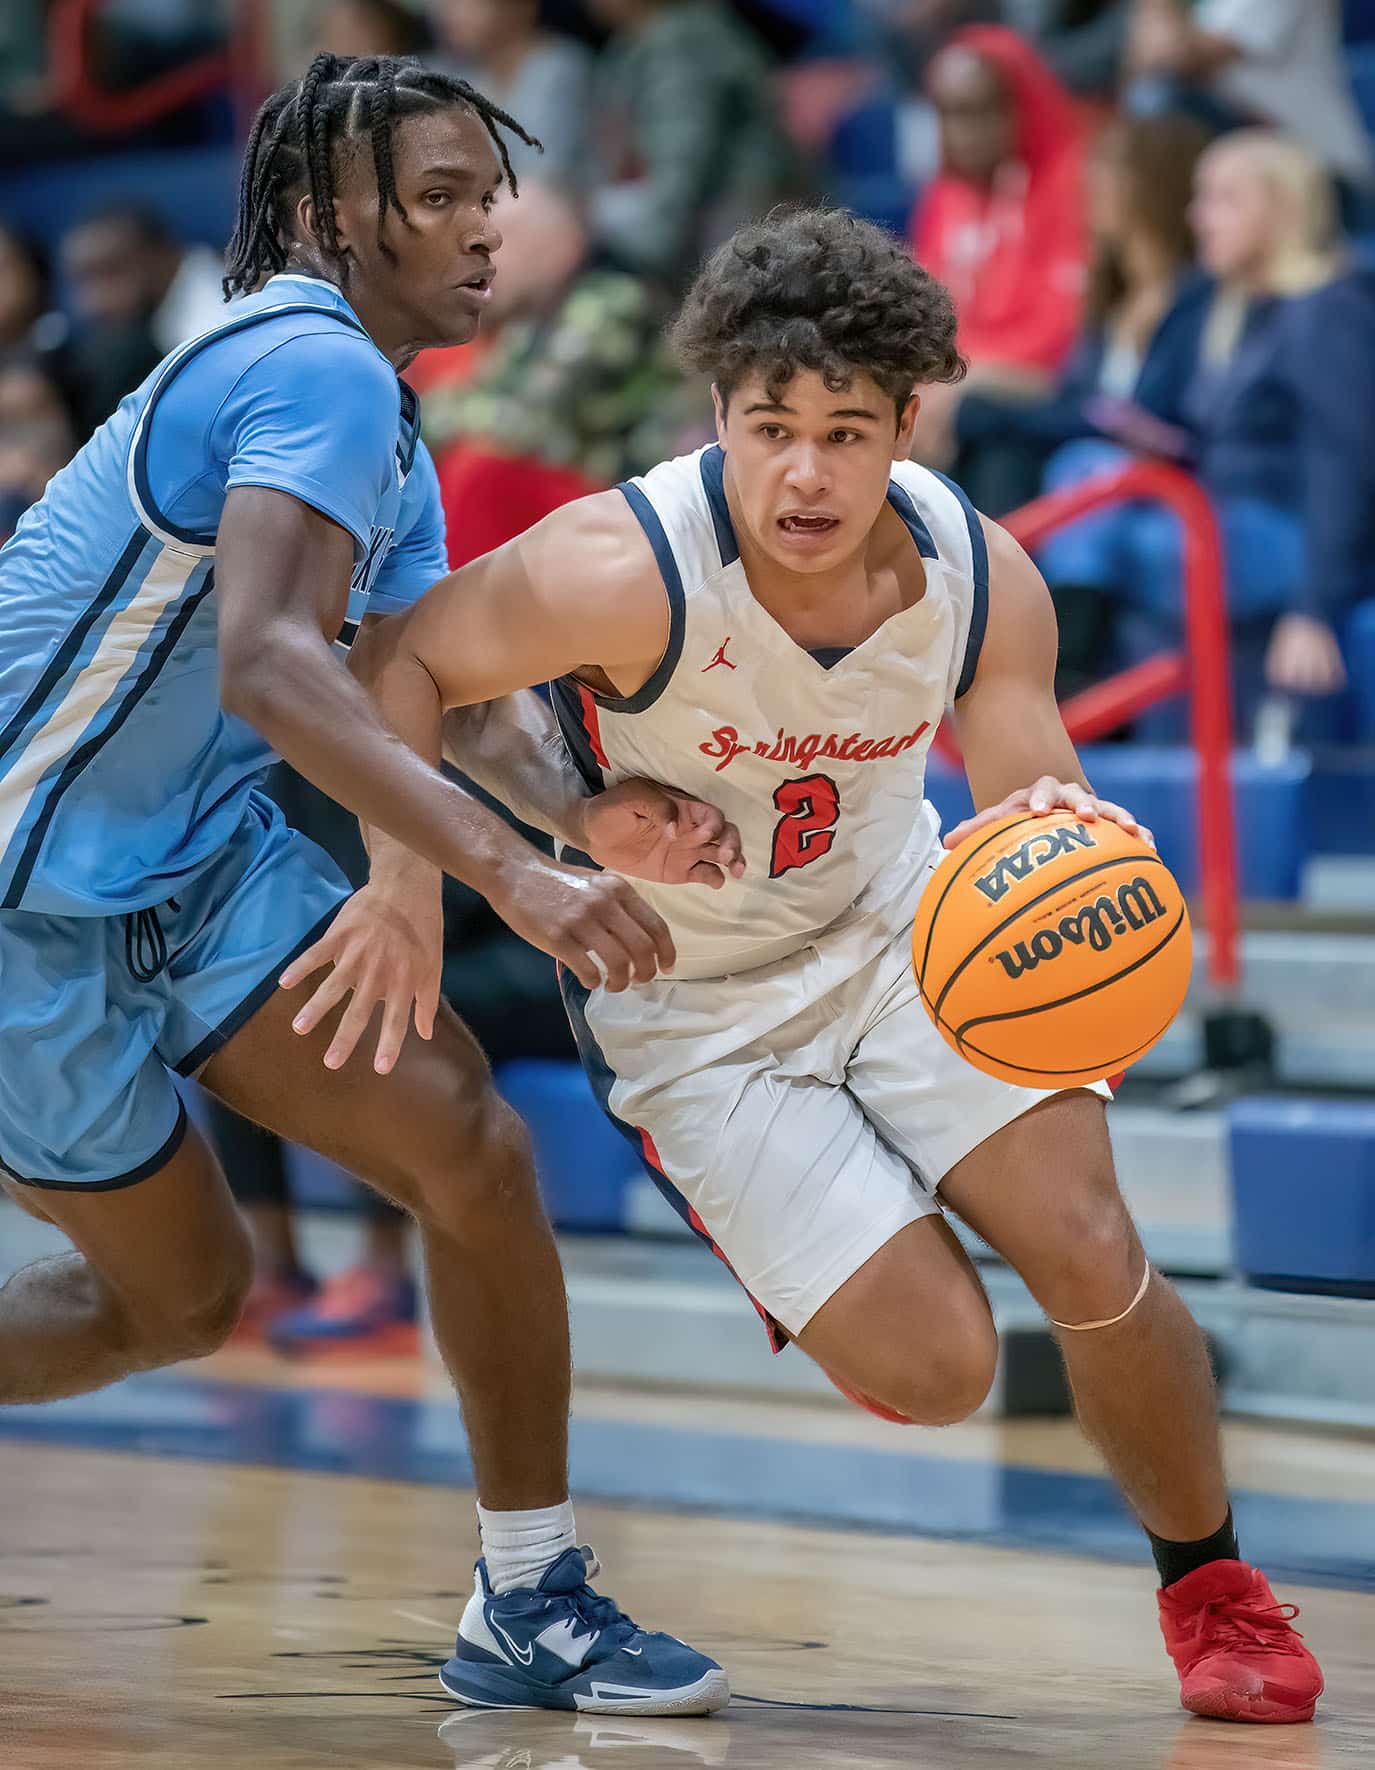 Springstead High,2, Quinn Lenimon tries ta advance past a Berkely Prep defender Wednesday in the 8th Annual Greg O’Connell Shootout at Springstead High. Photo by JOE DiCRISTOFALO